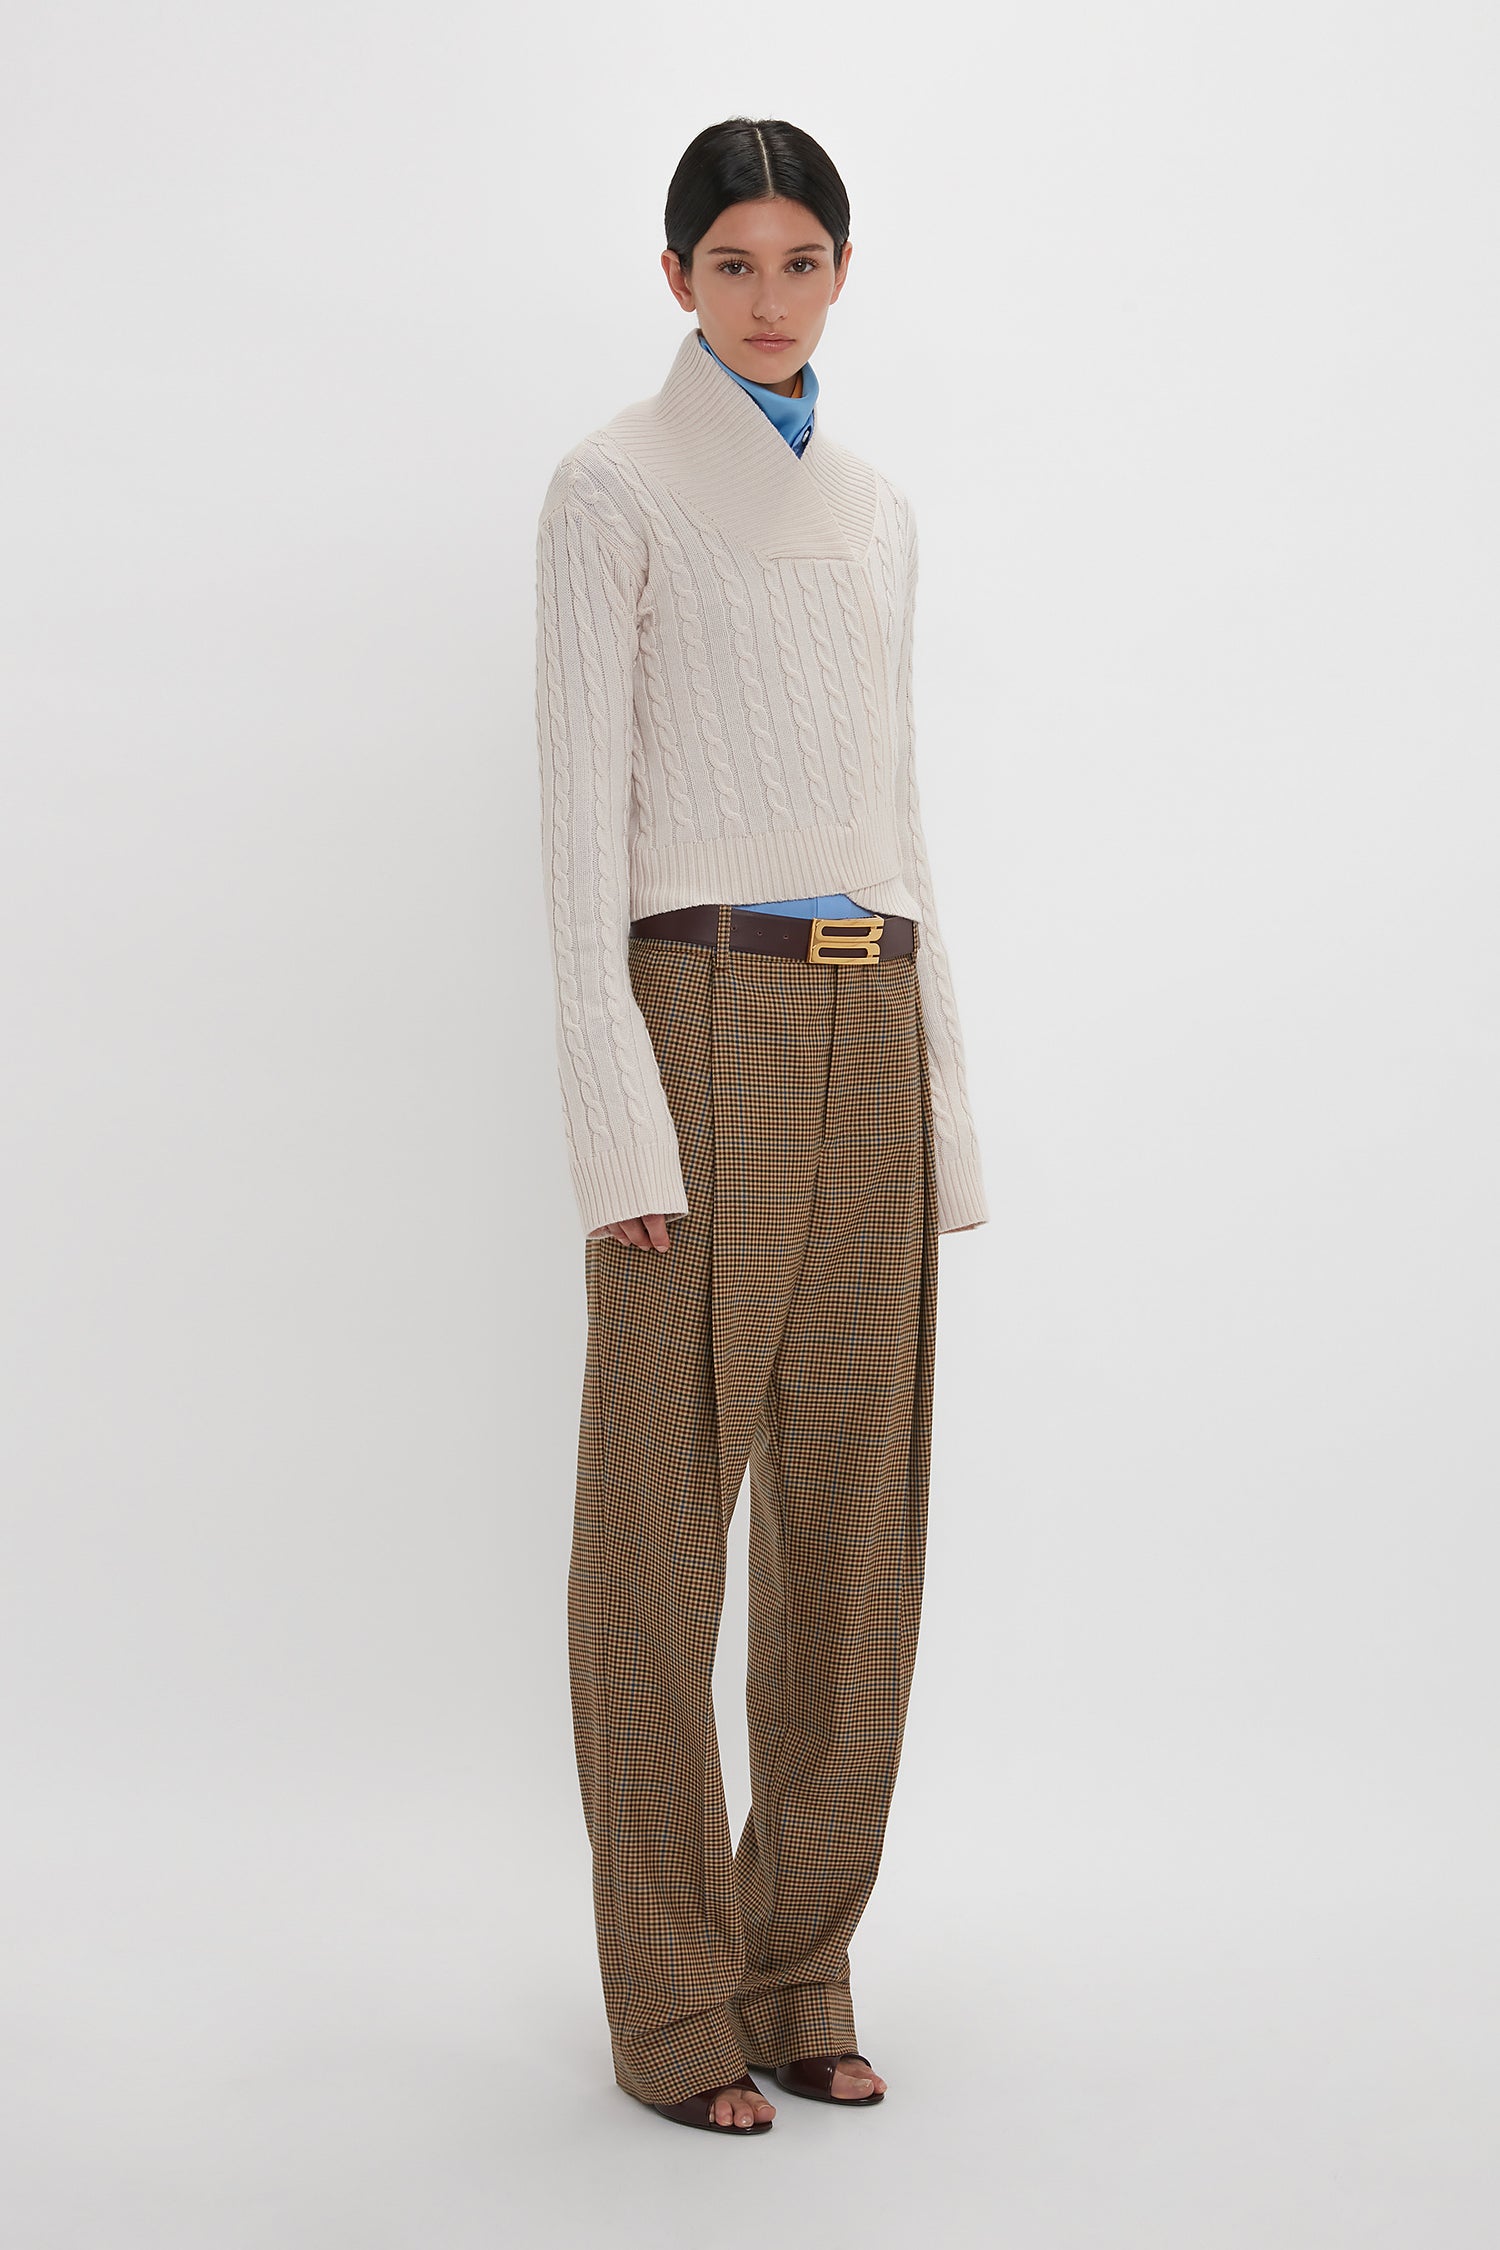 A person stands against a plain background wearing a Wrap Detail Jumper In Bone by Victoria Beckham, paired with a blue collared shirt, brown plaid wide-leg trousers, and black sandals.